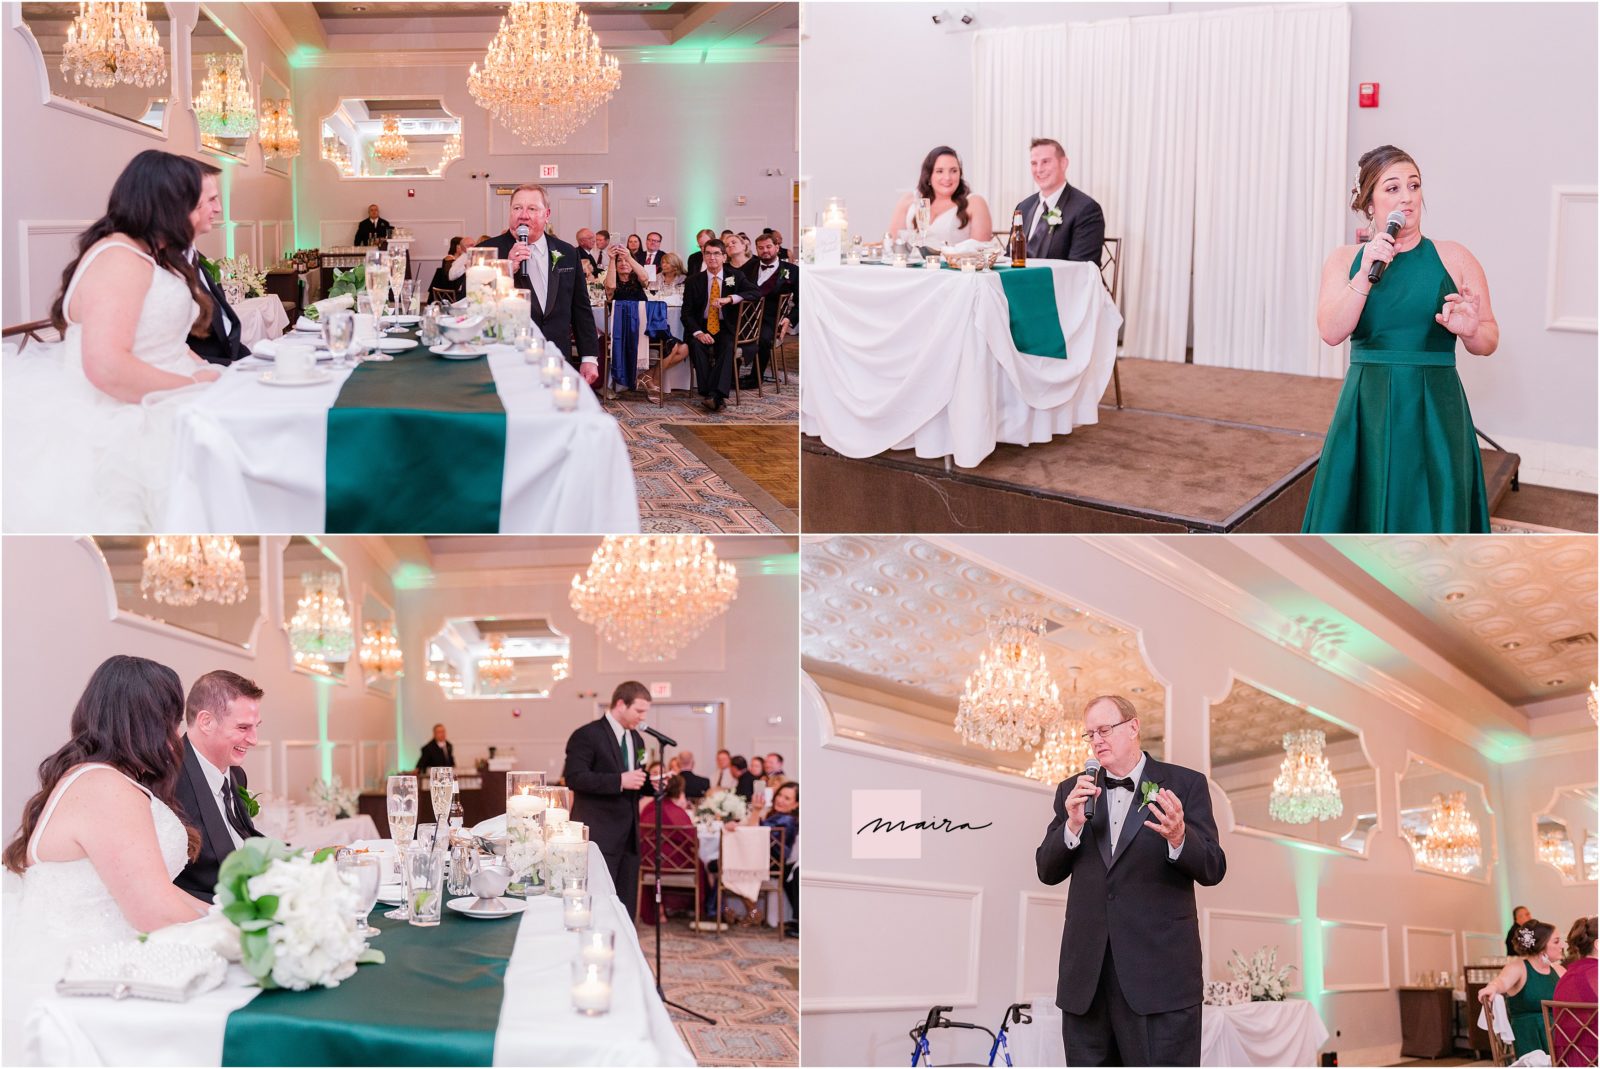 Oakbrook wedding in Drury Lane ,Venue, Reception Hall, Toast, Father of the bride speech, Bridesmaid and Best man toast 